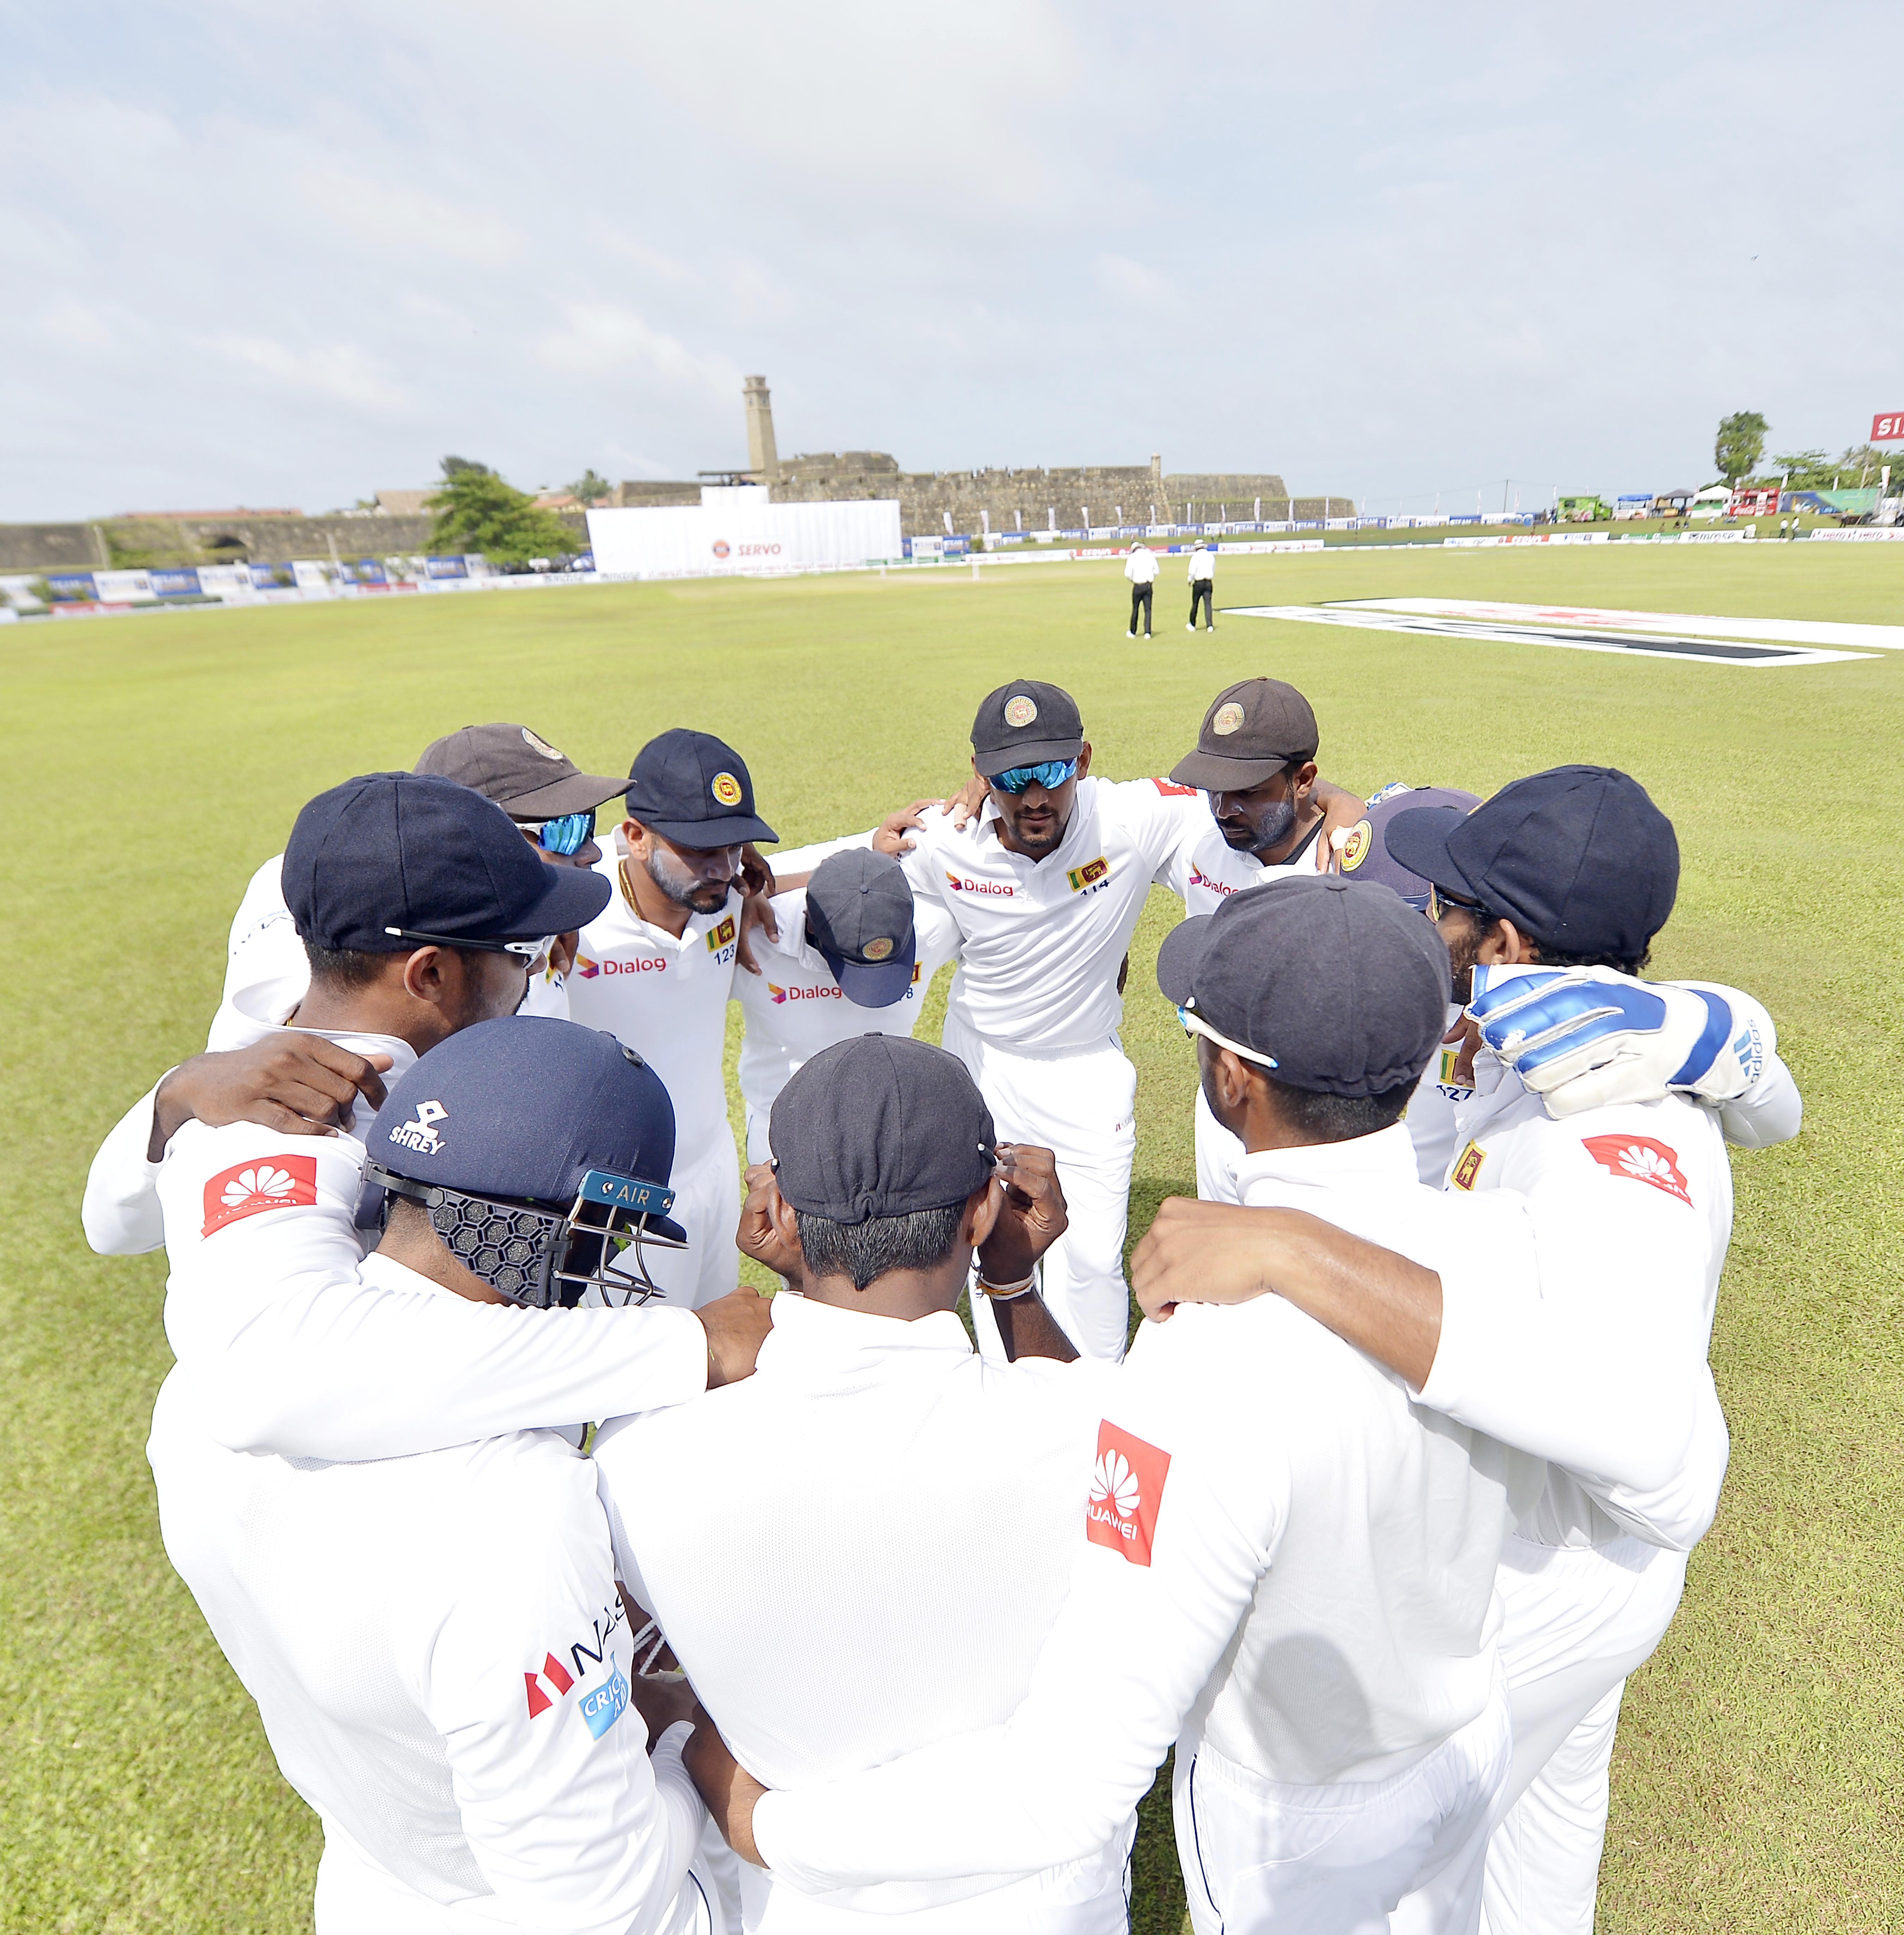 England tour of Sri Lanka in March 2020